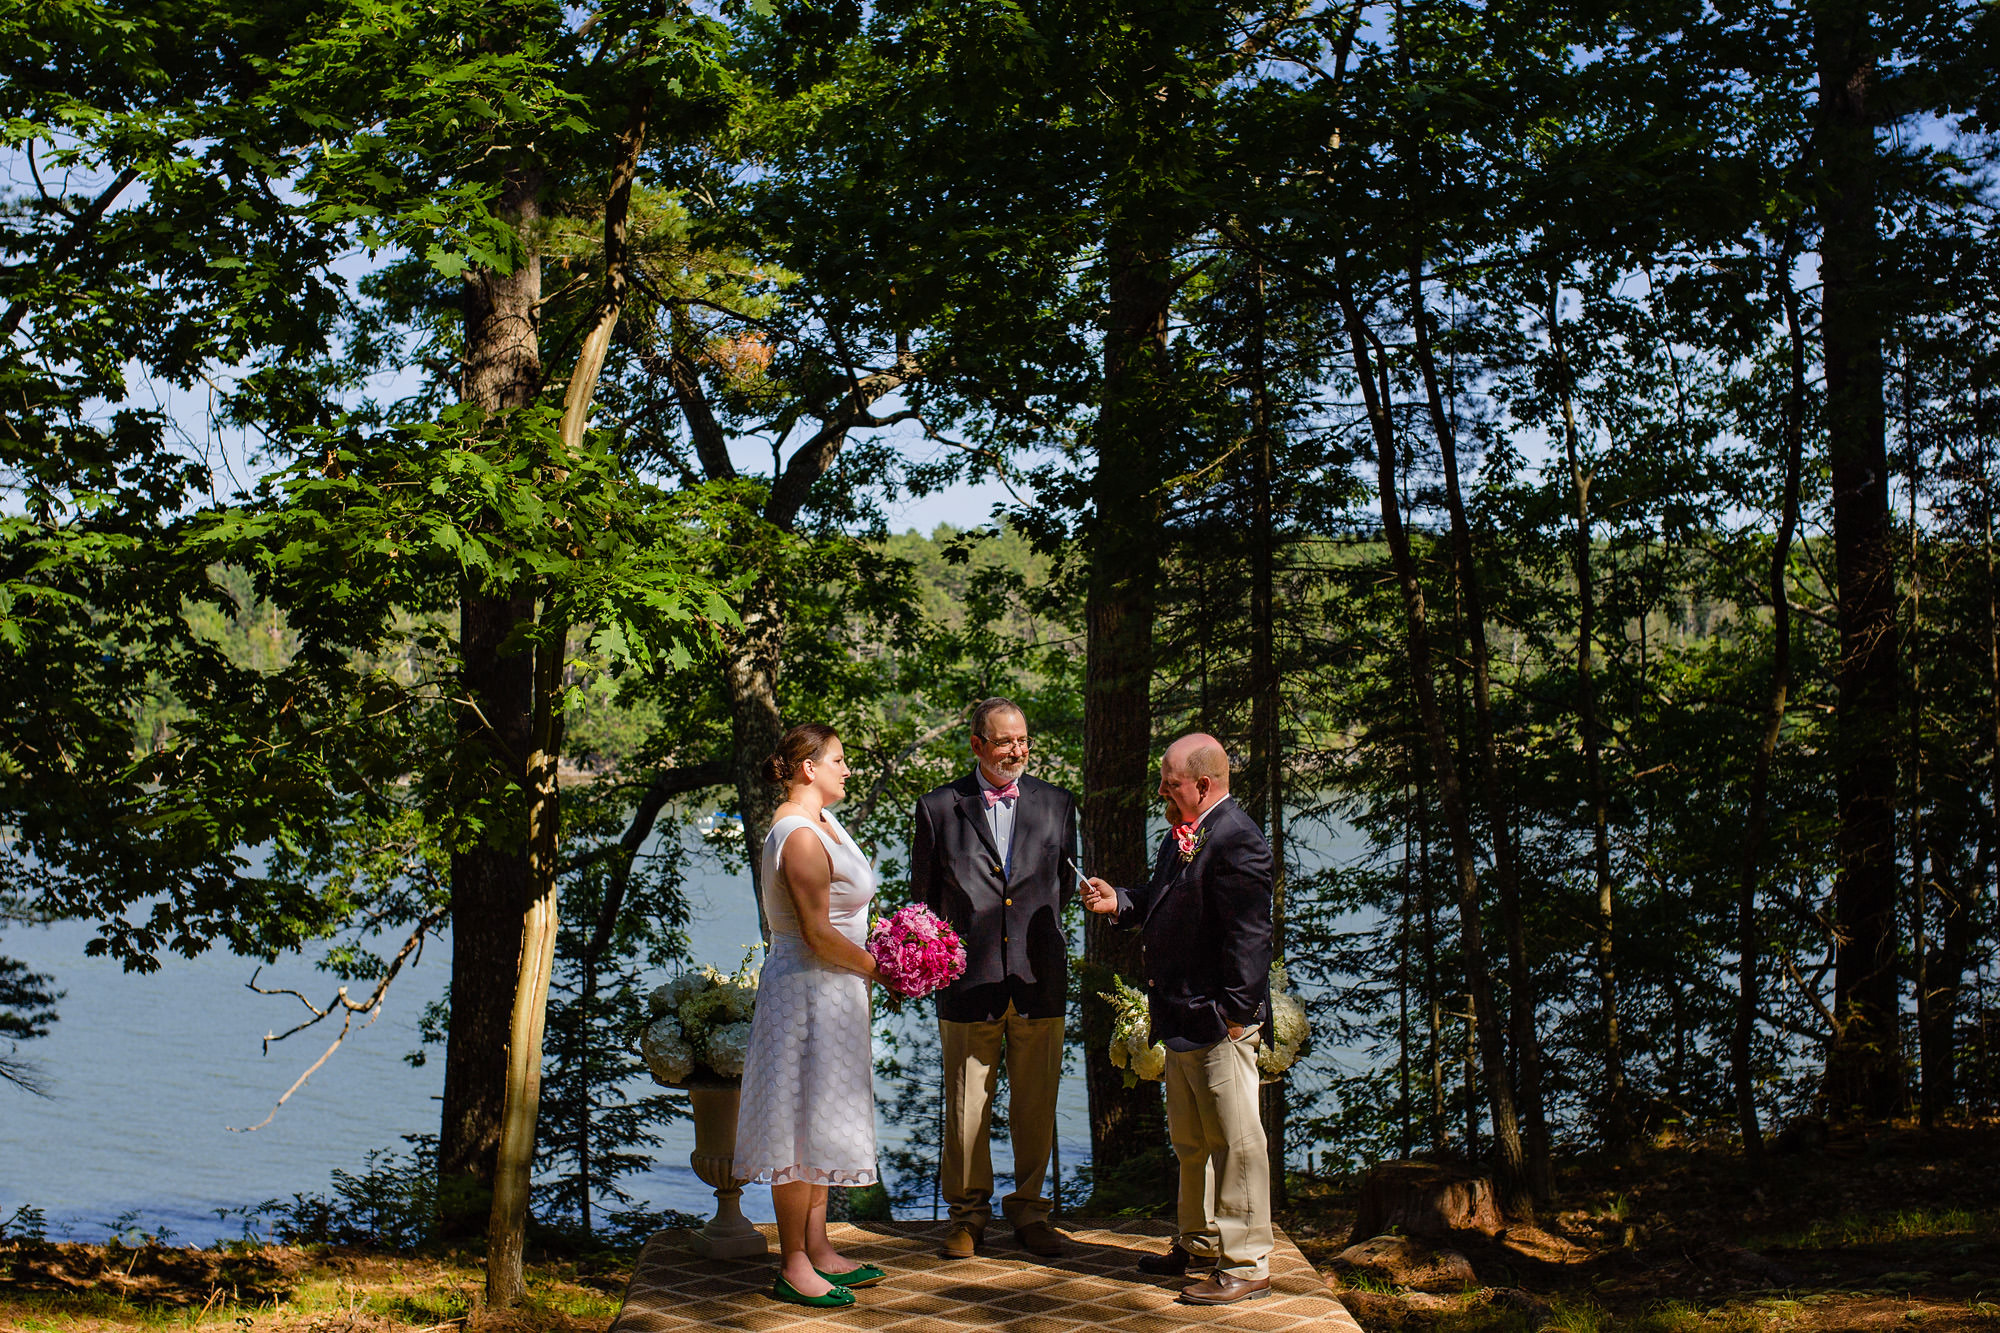 Camie and Dave at their Brunswick Maine wedding.